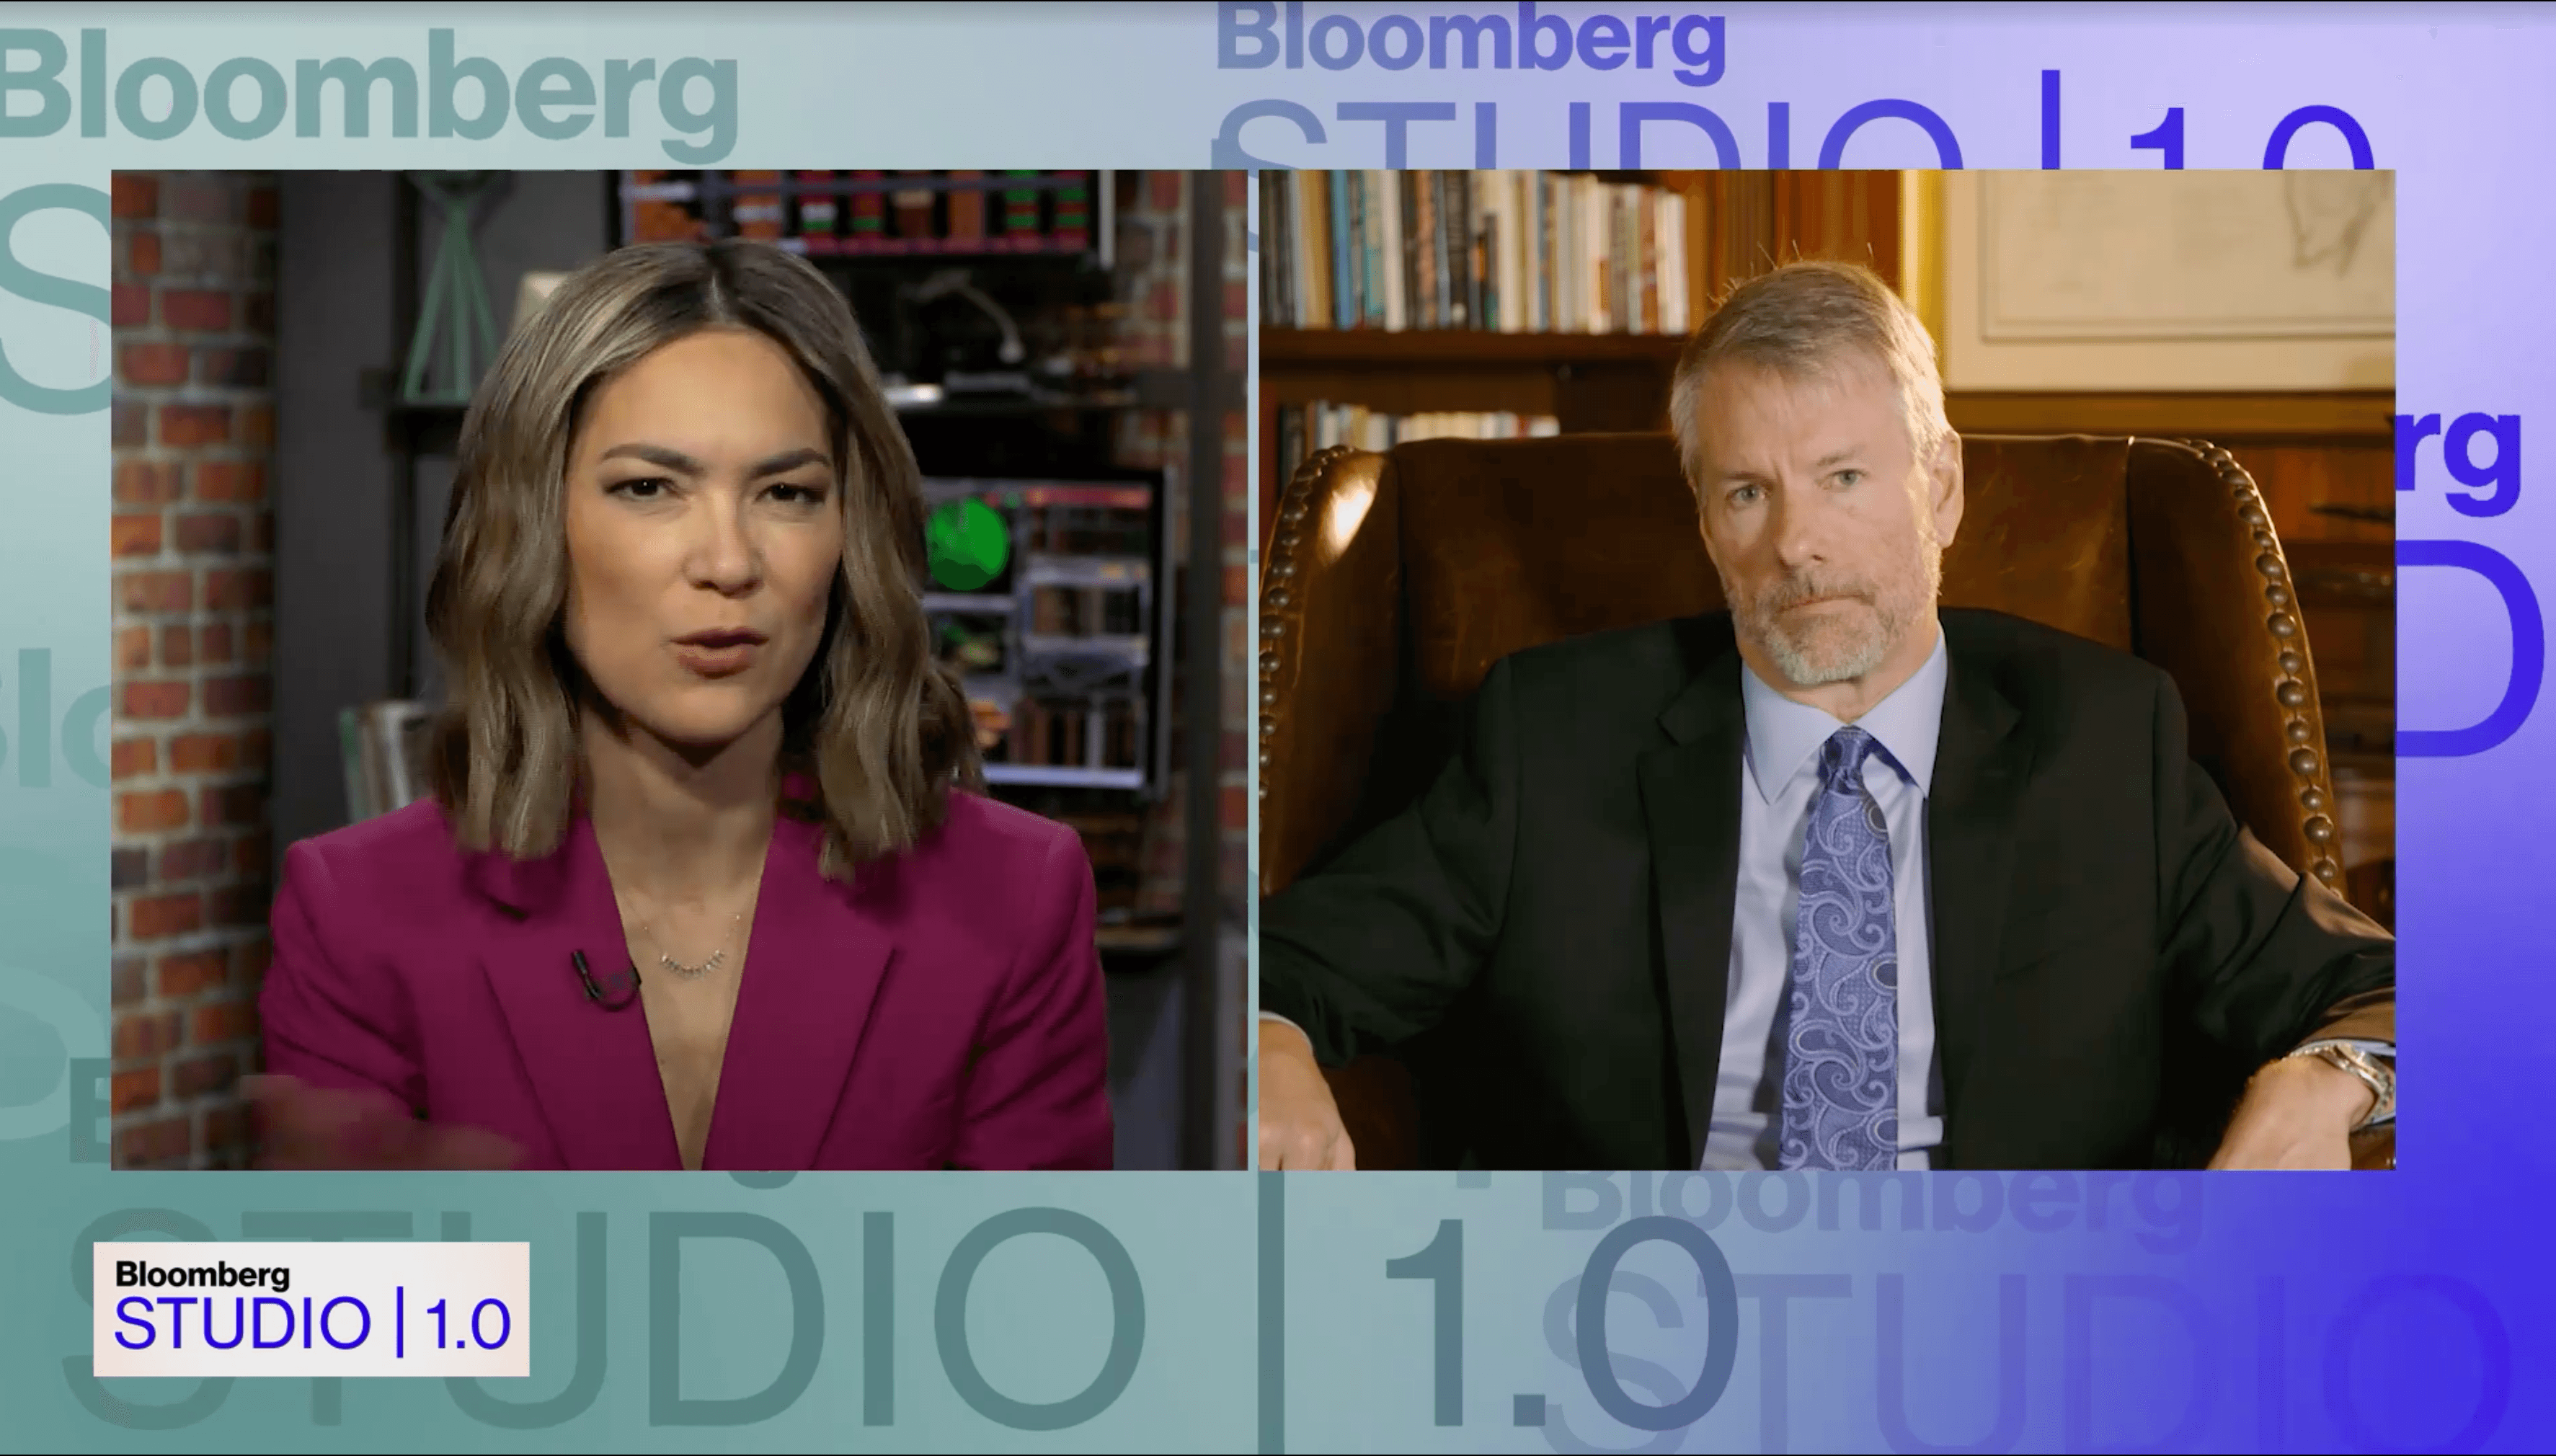 microstrategy-ceo-michael-saylor-on-bloomberg-studio-1.0.png